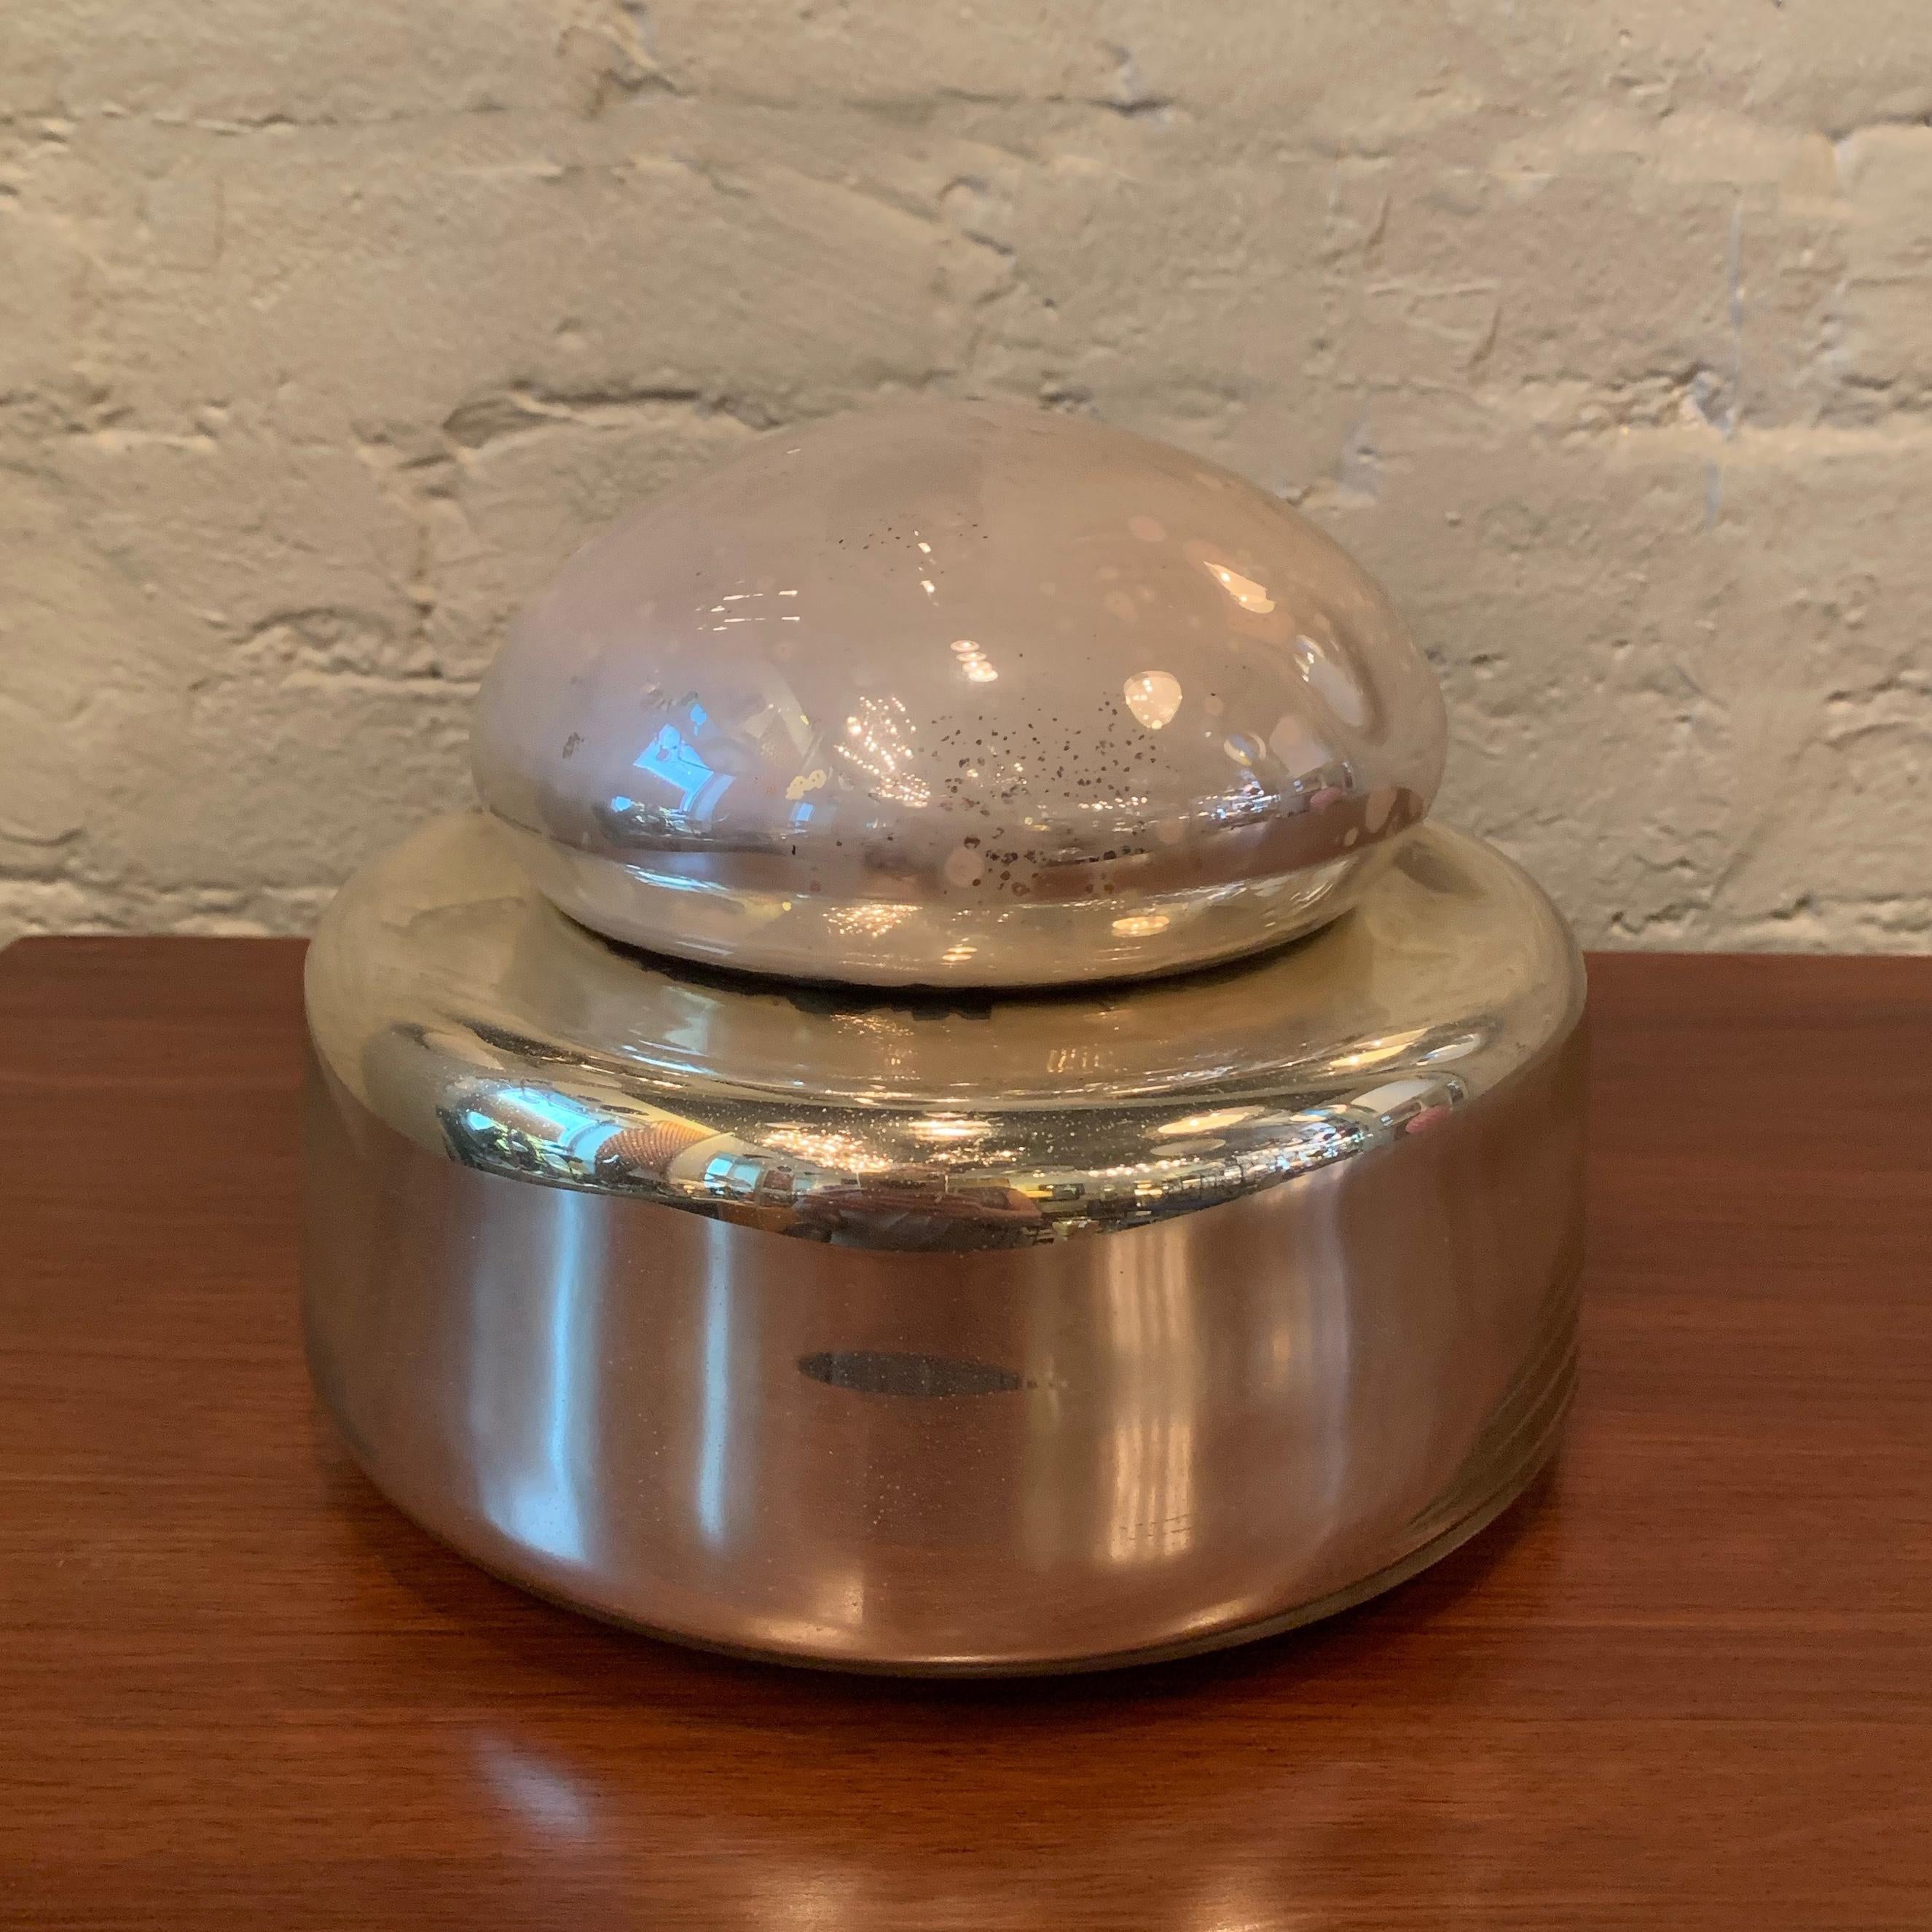 Mid-Century Modern, two-toned, mercury glass, serving bowl or vessel by Georg Jensen features a gold base with patinated silver lid.